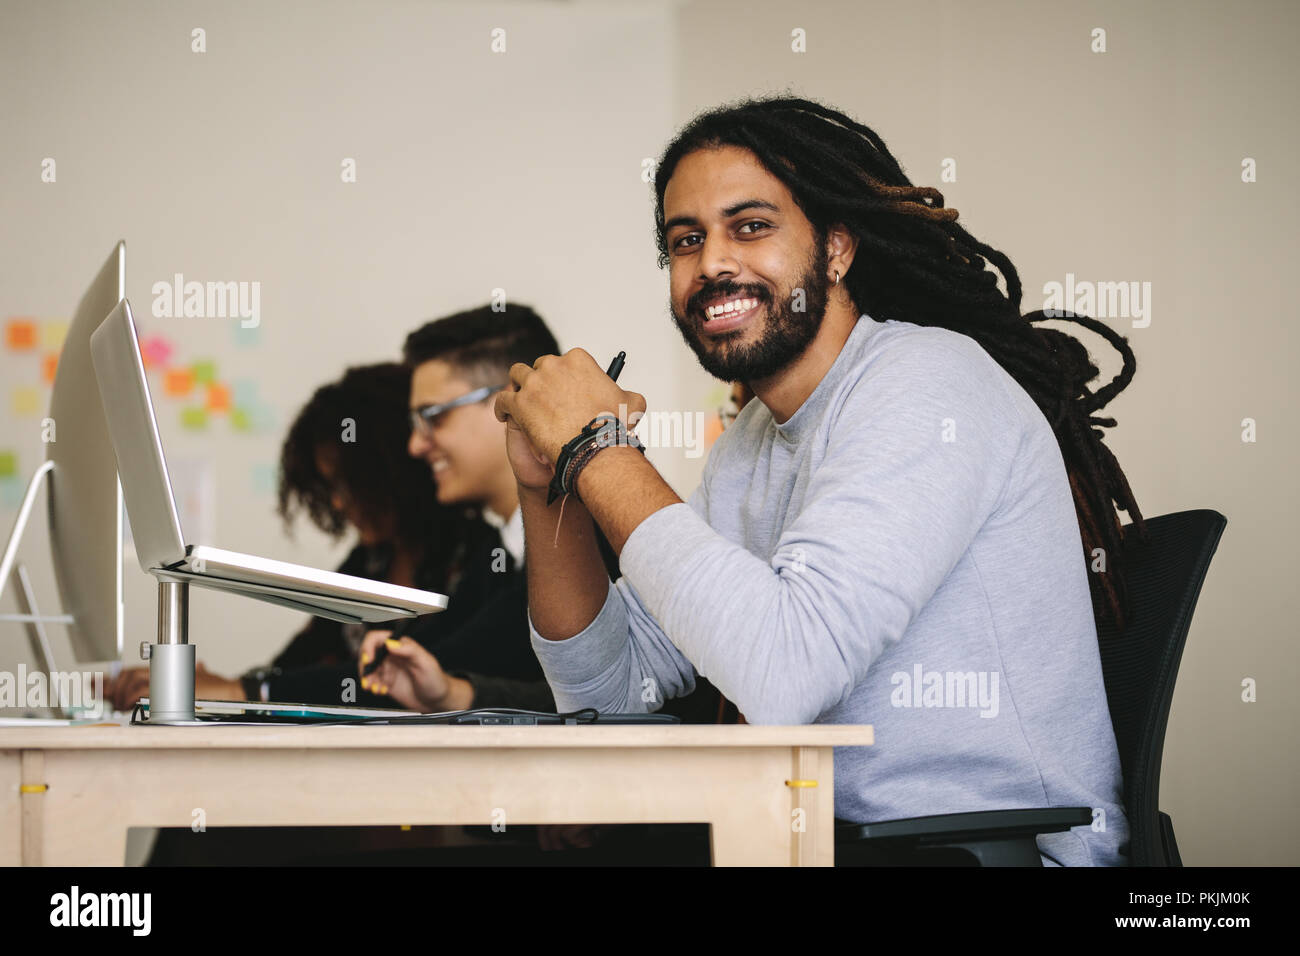 Smiling entrepreneur sitting at his desk with a laptop. Business people working in office sitting at their desks. Stock Photo